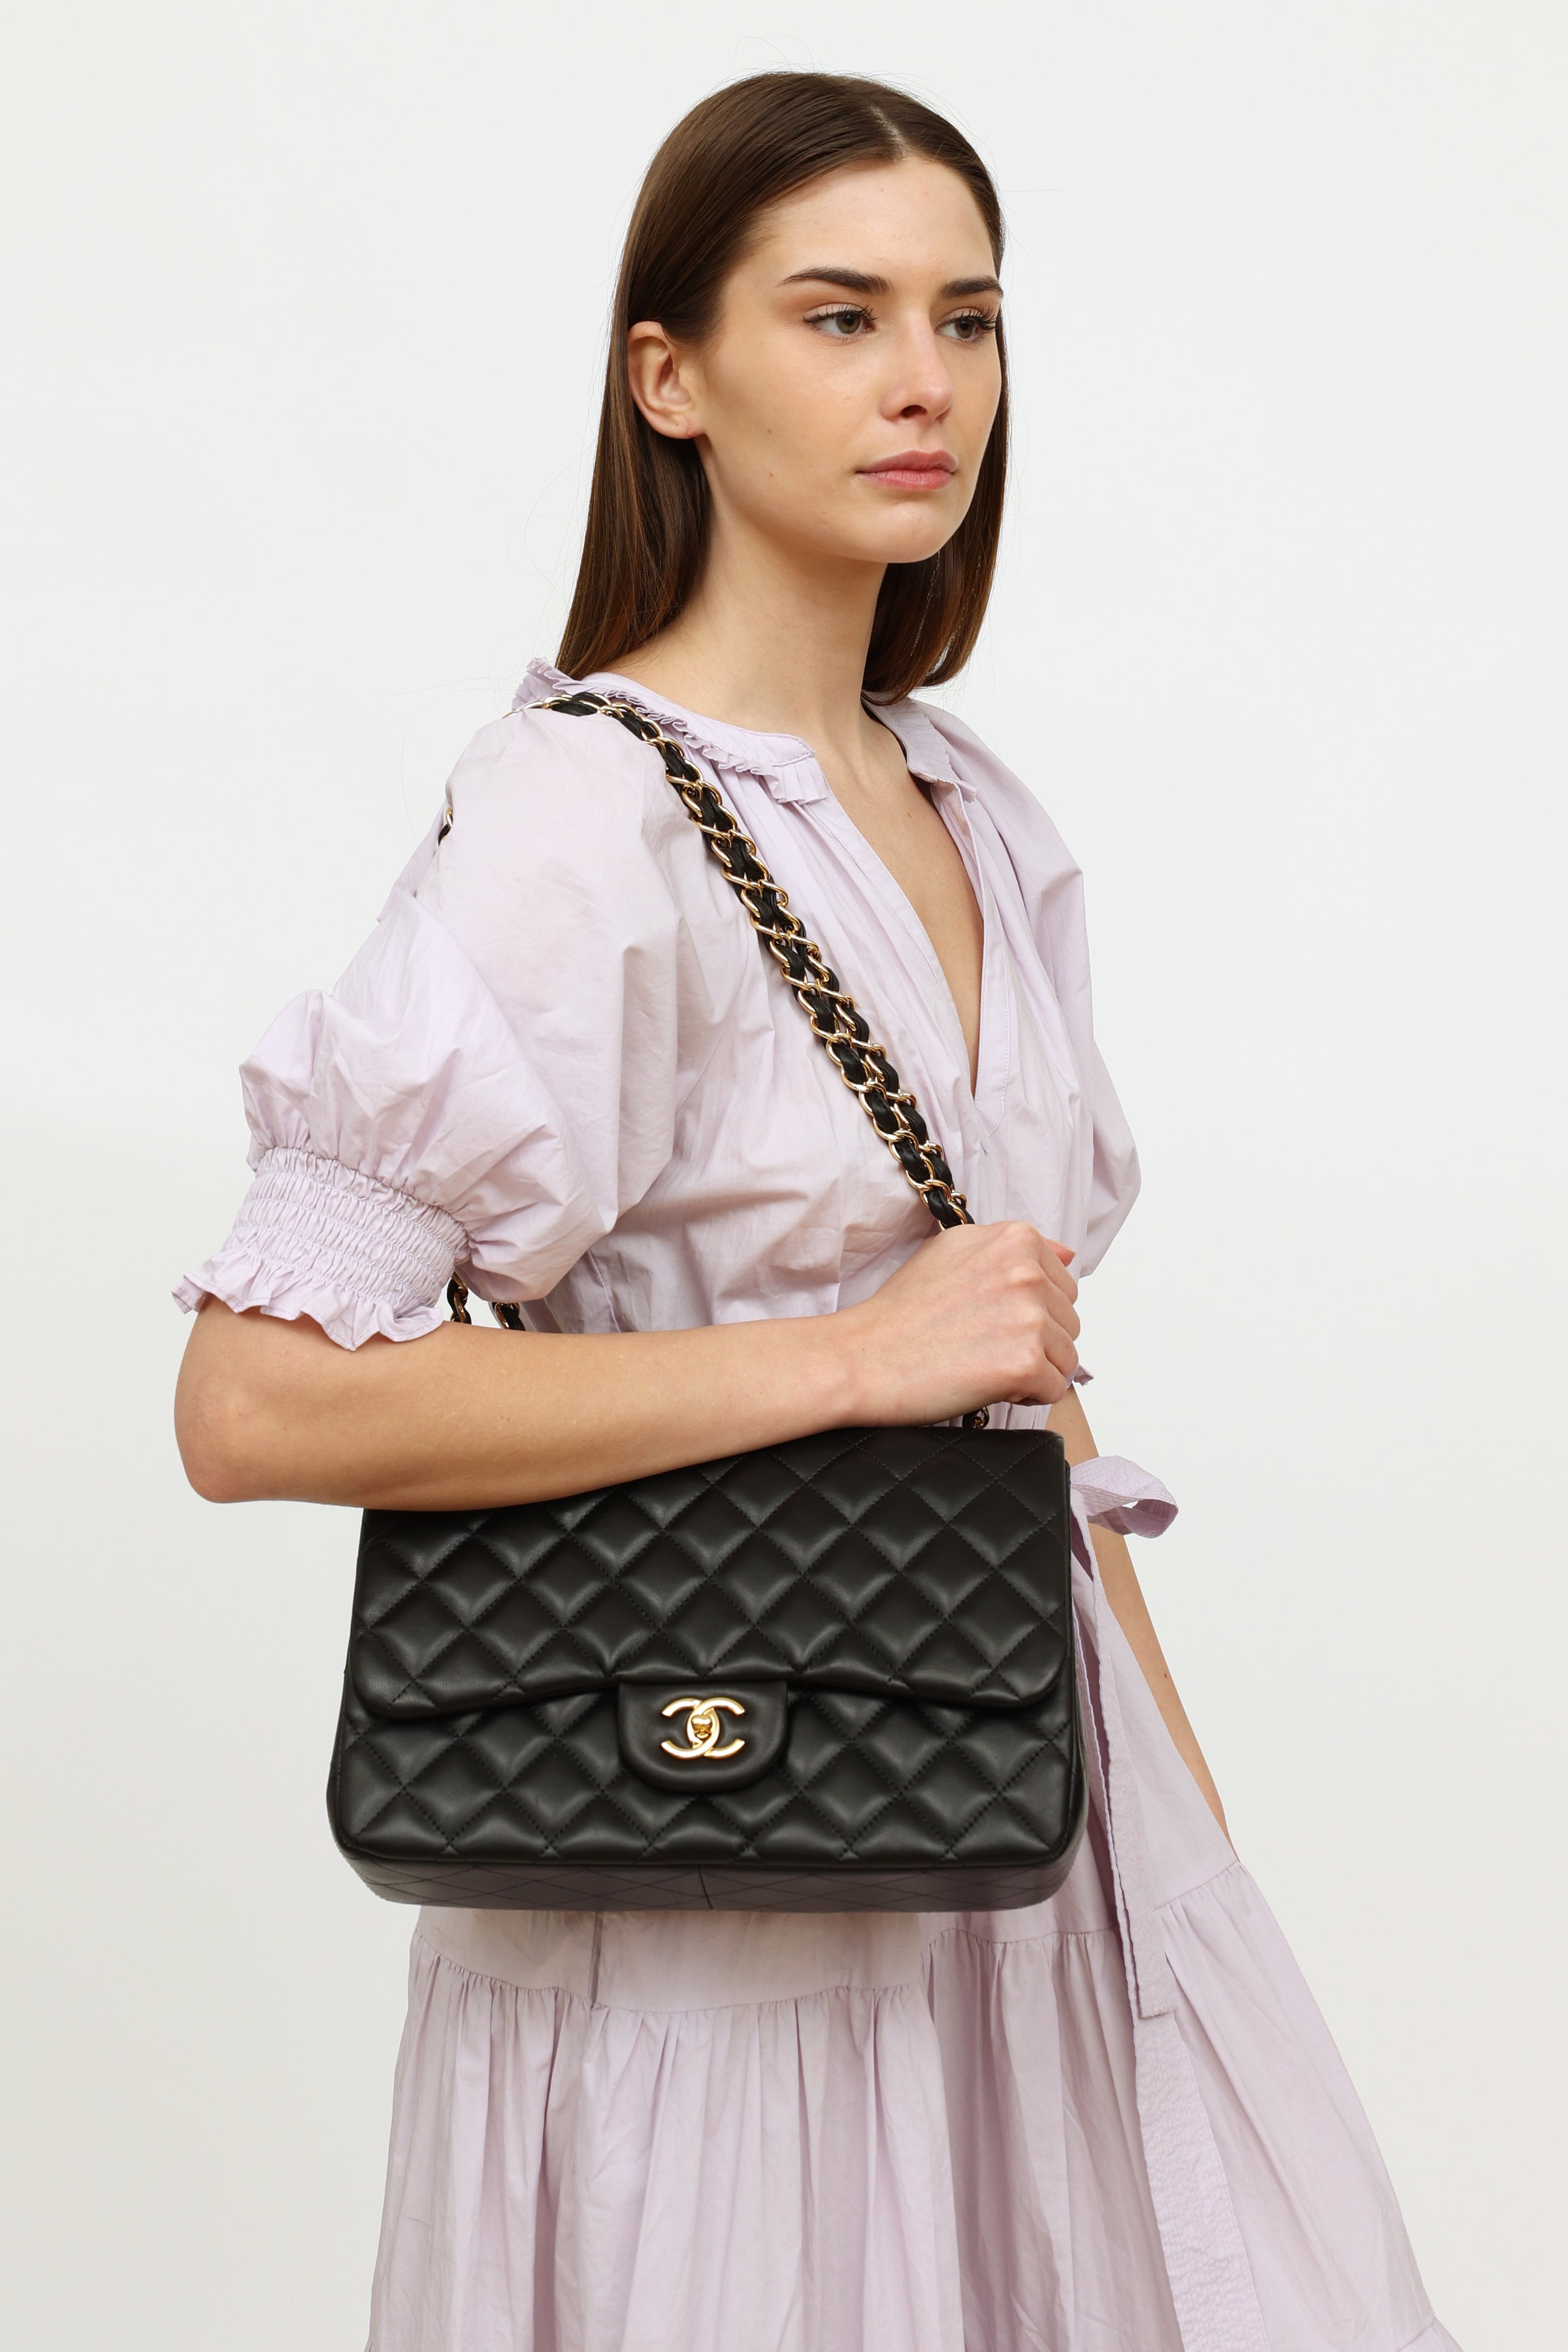 Chanel // 2009 Black Quilted Classic Flap Jumbo Bag – VSP Consignment